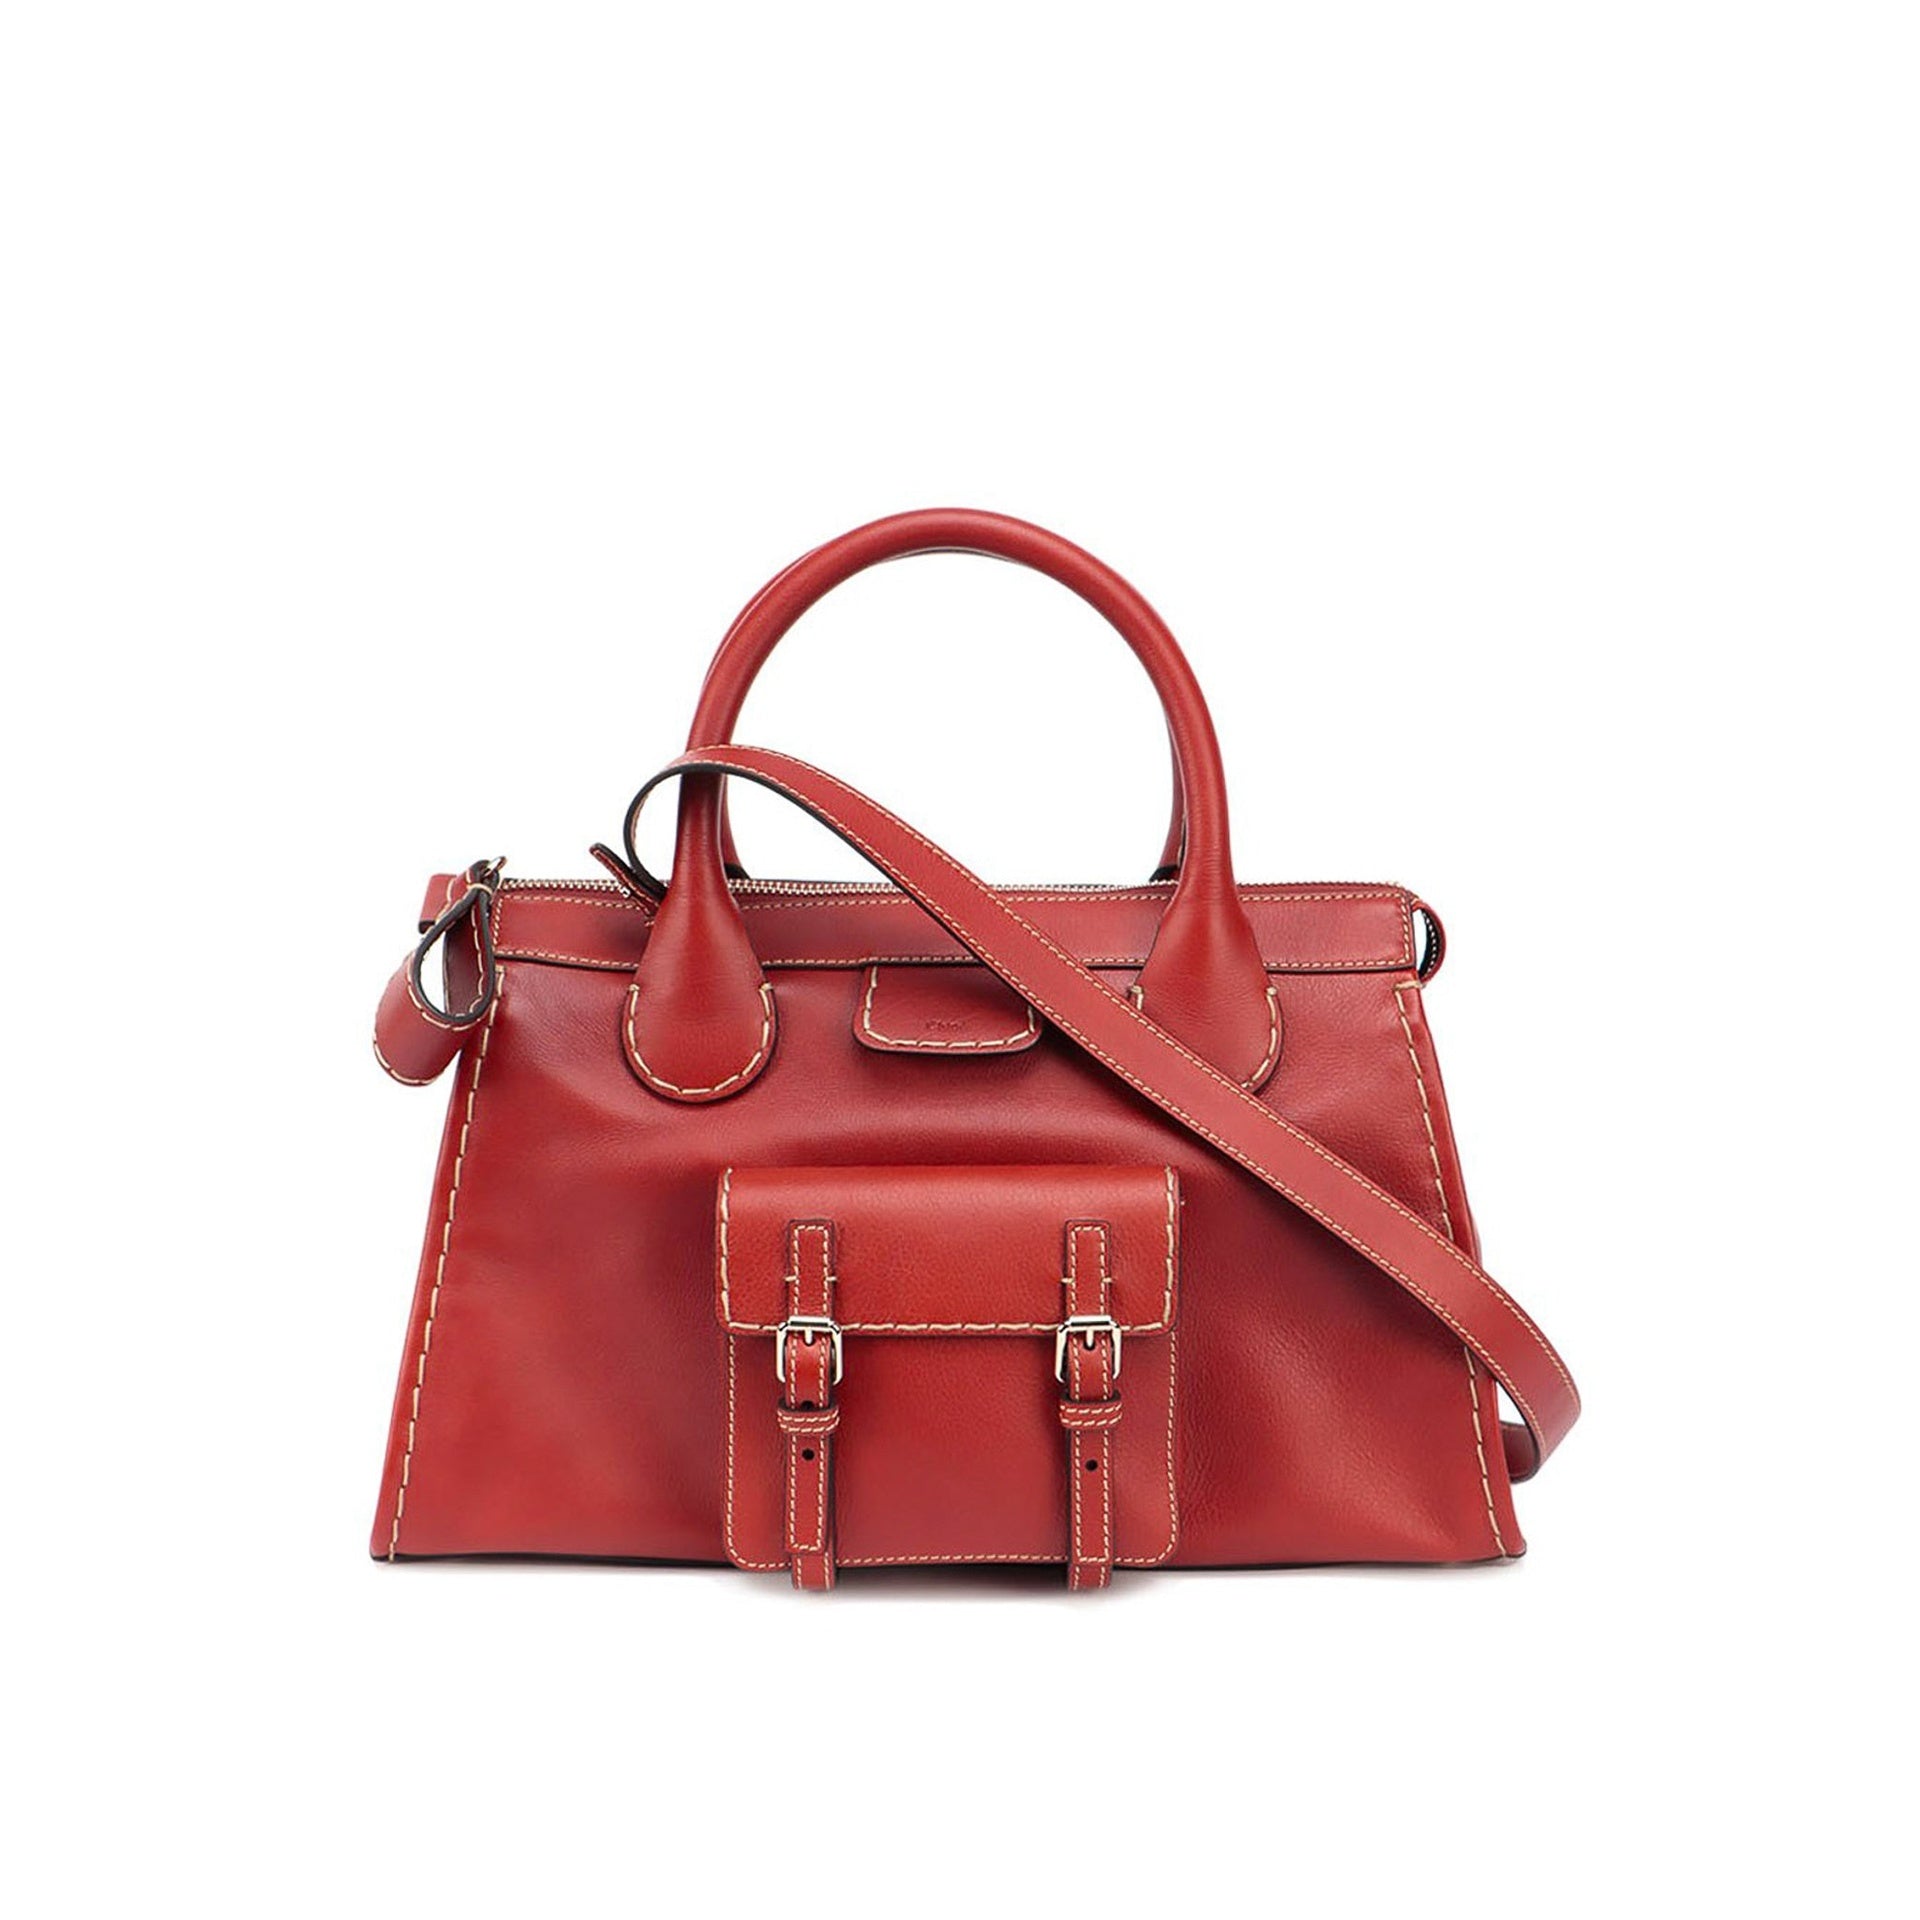 CHLOE-OUTLET-SALE-Chloe-Edith-Leather-Tote-Bag-Taschen-BROWN-UNI-ARCHIVE-COLLECTION.jpg